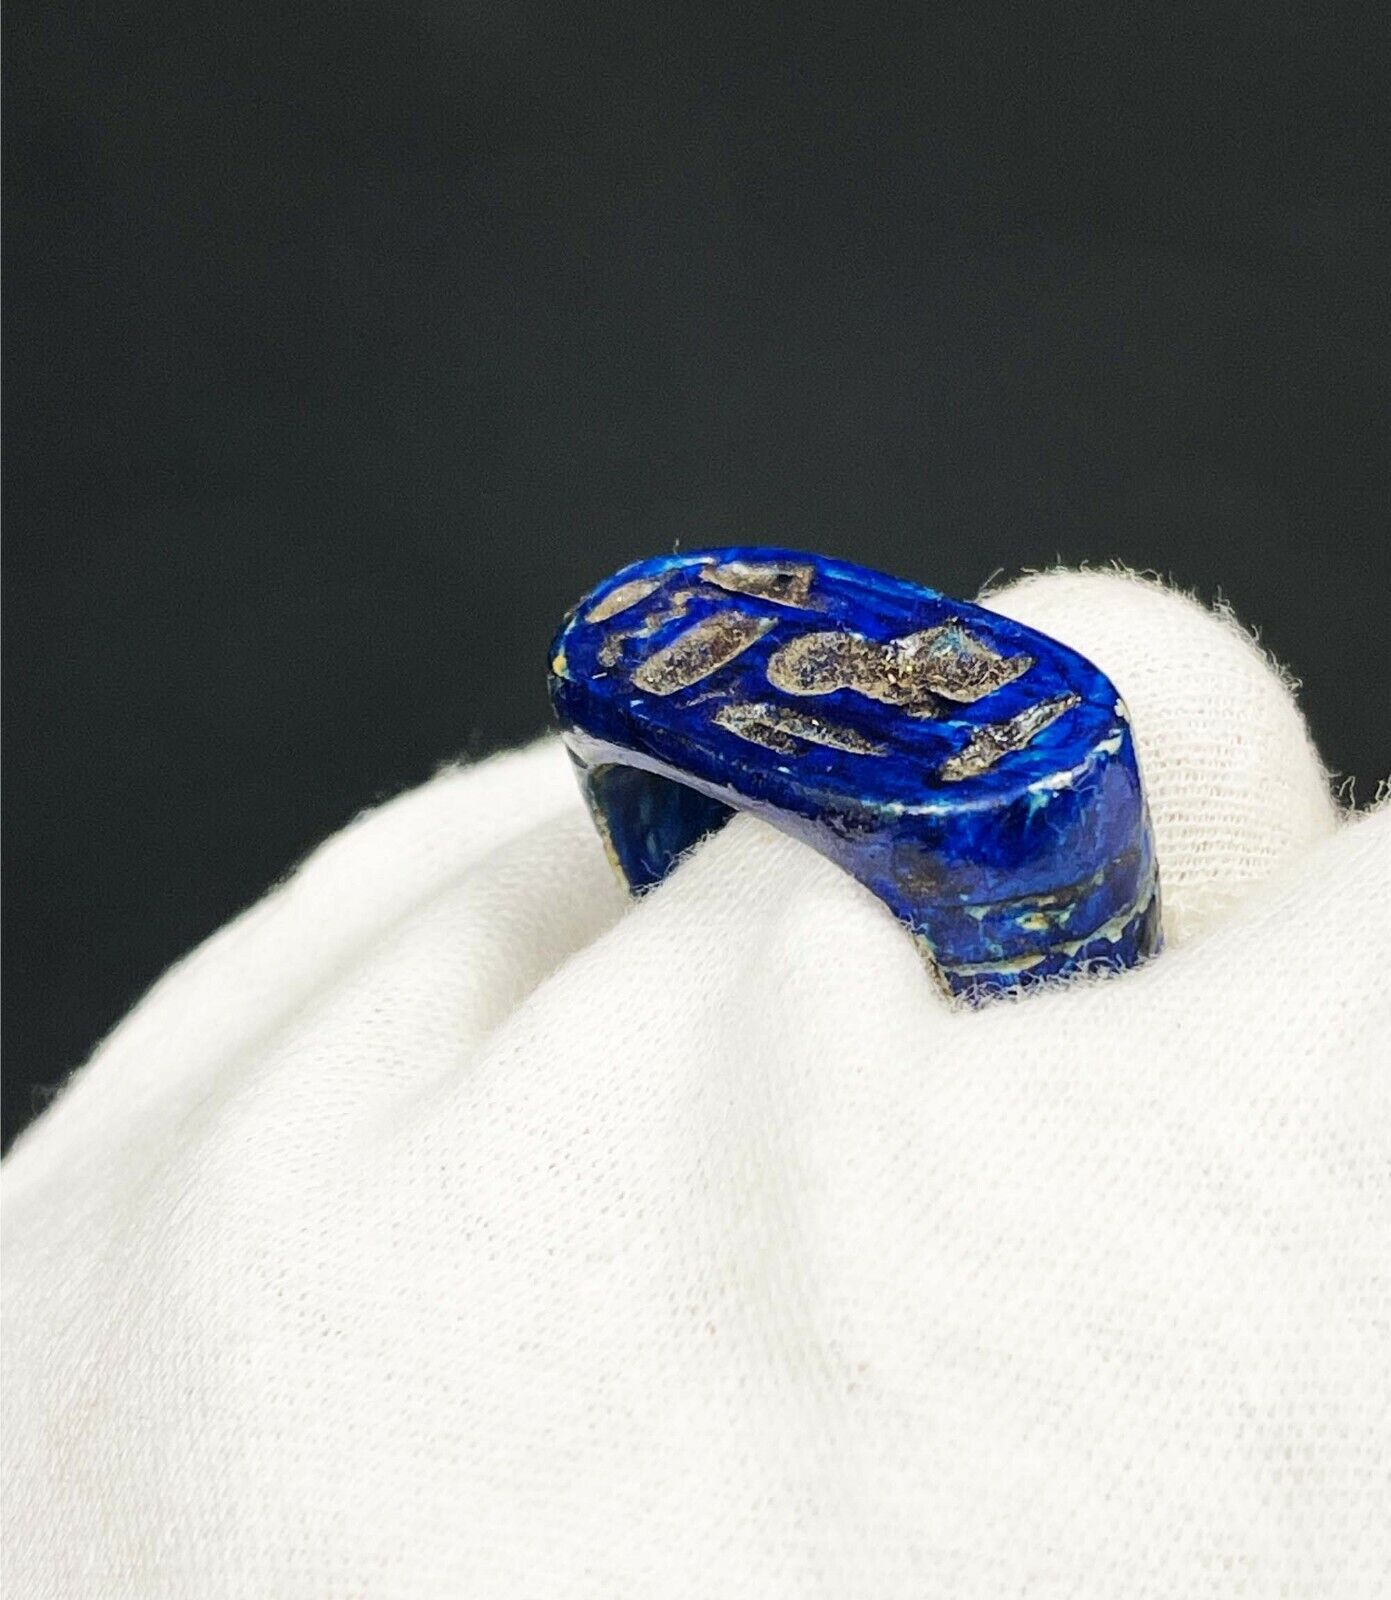 Fantastic Egyptian Ring of ISIS Goddess cartouche made of porcelain